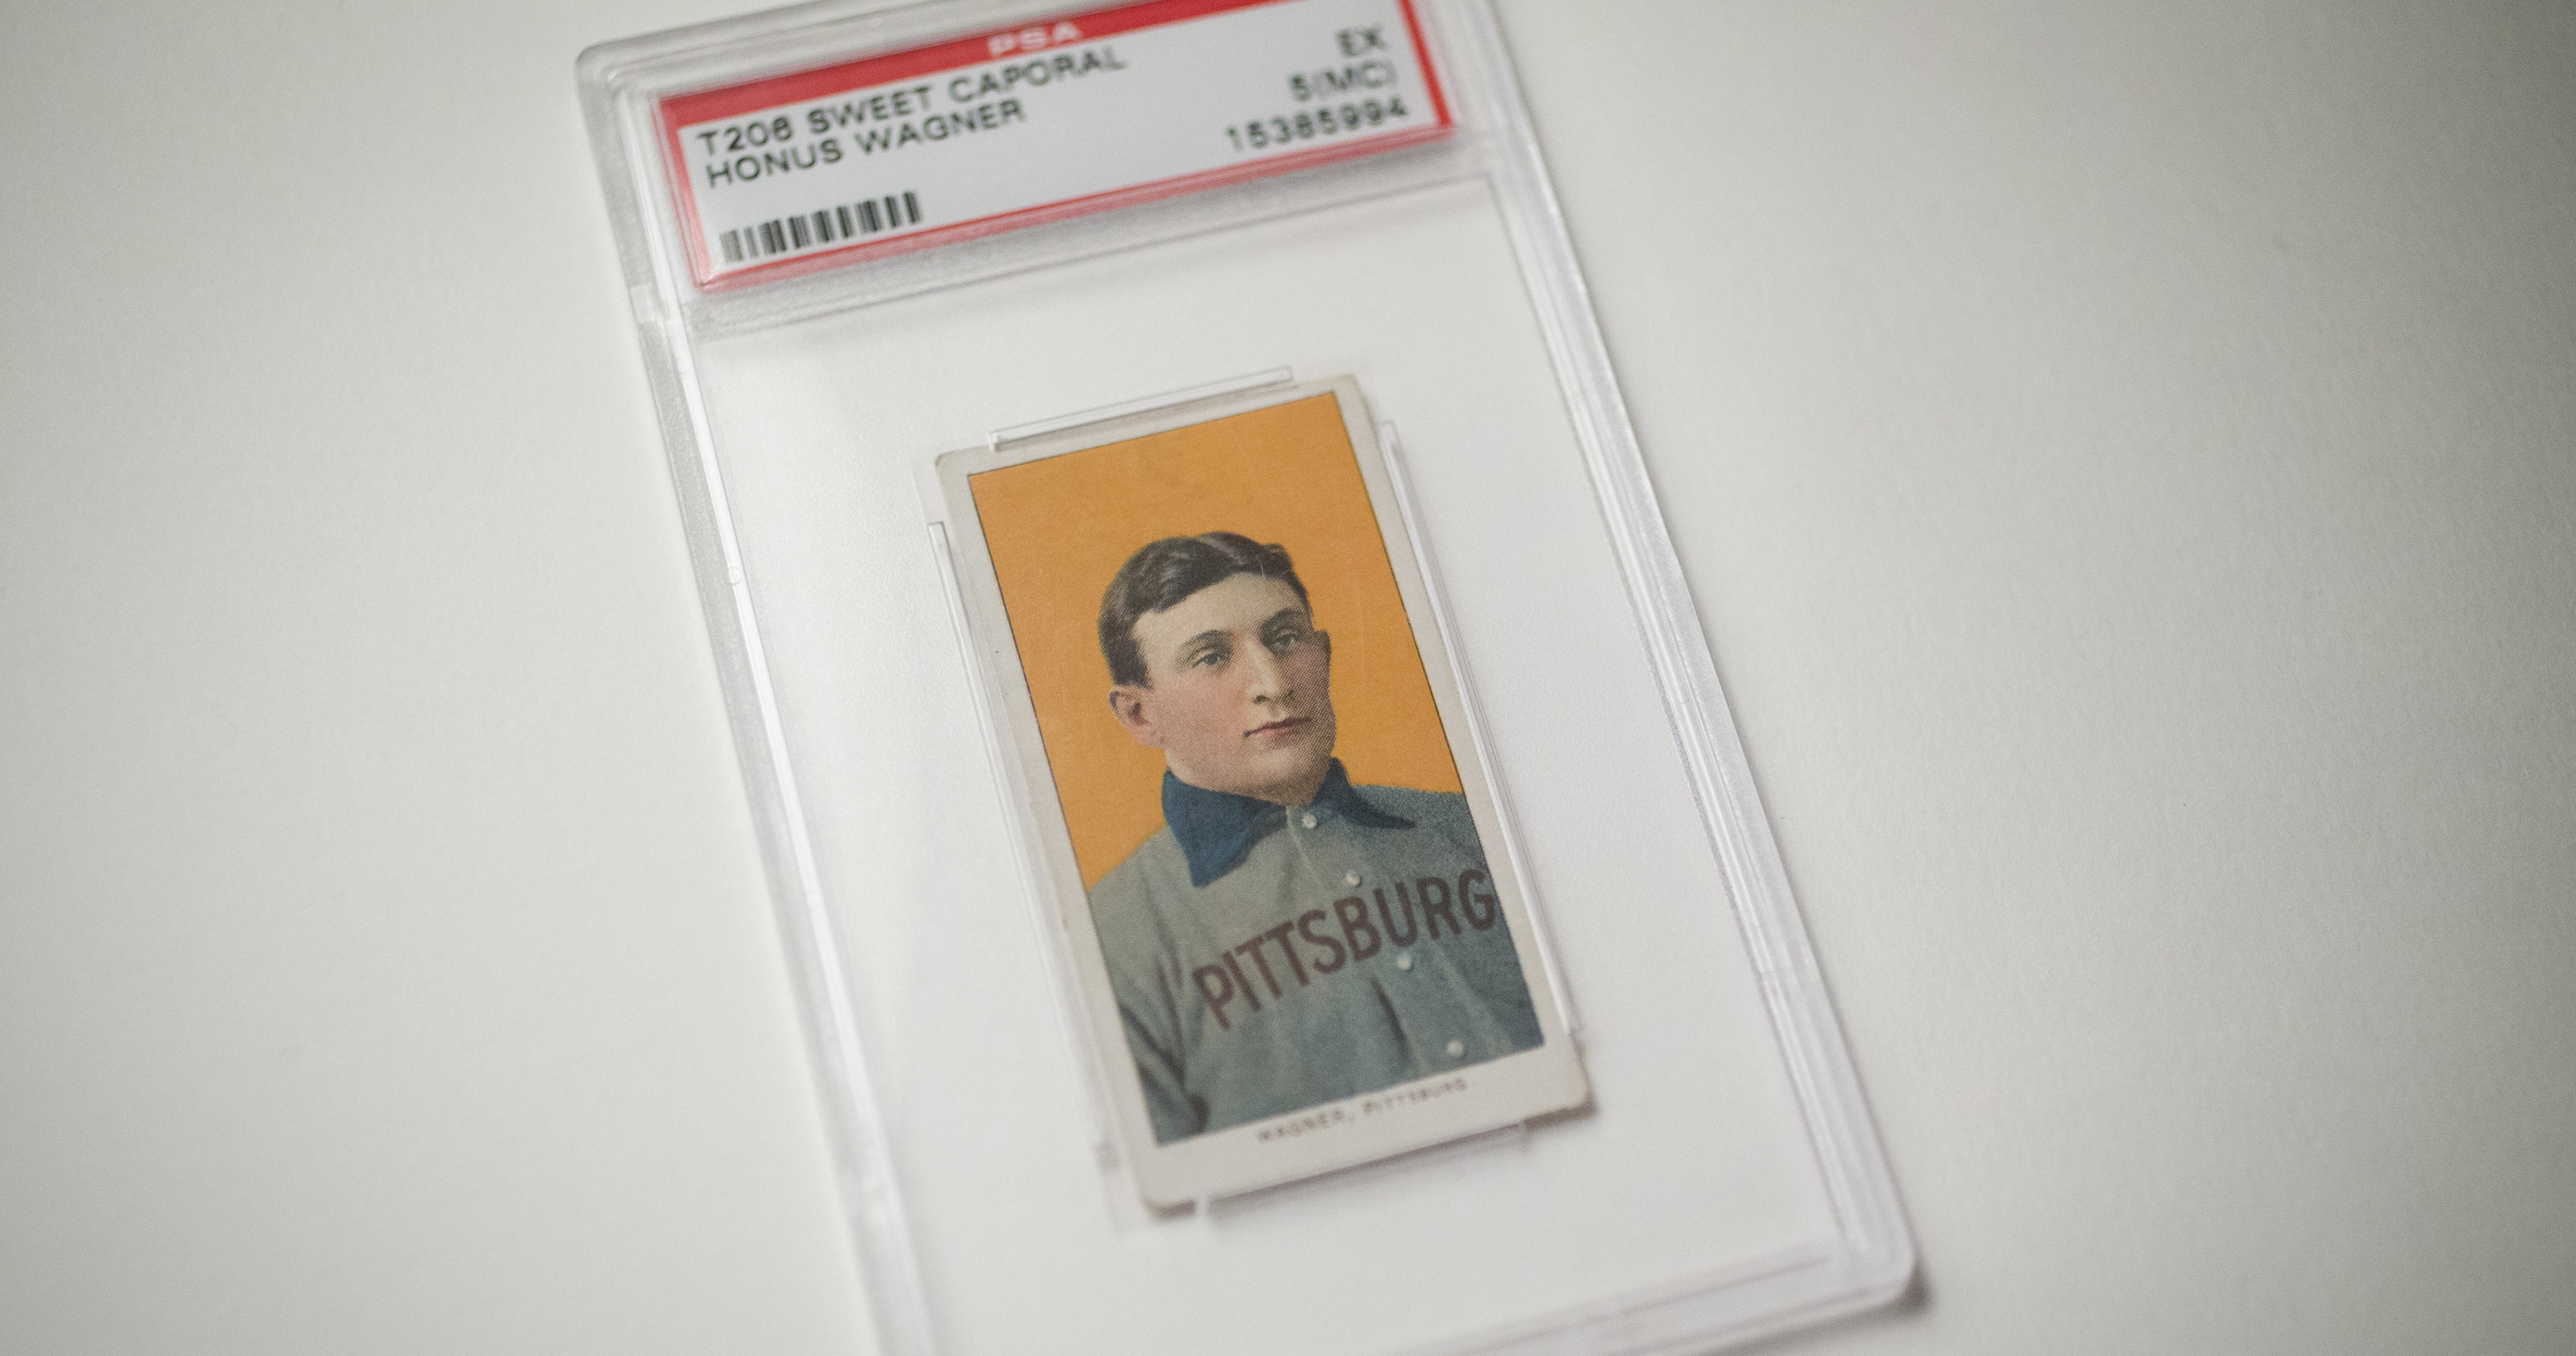 Half of a T206 Honus Wagner card sells for more than $475K in auction - The  Athletic